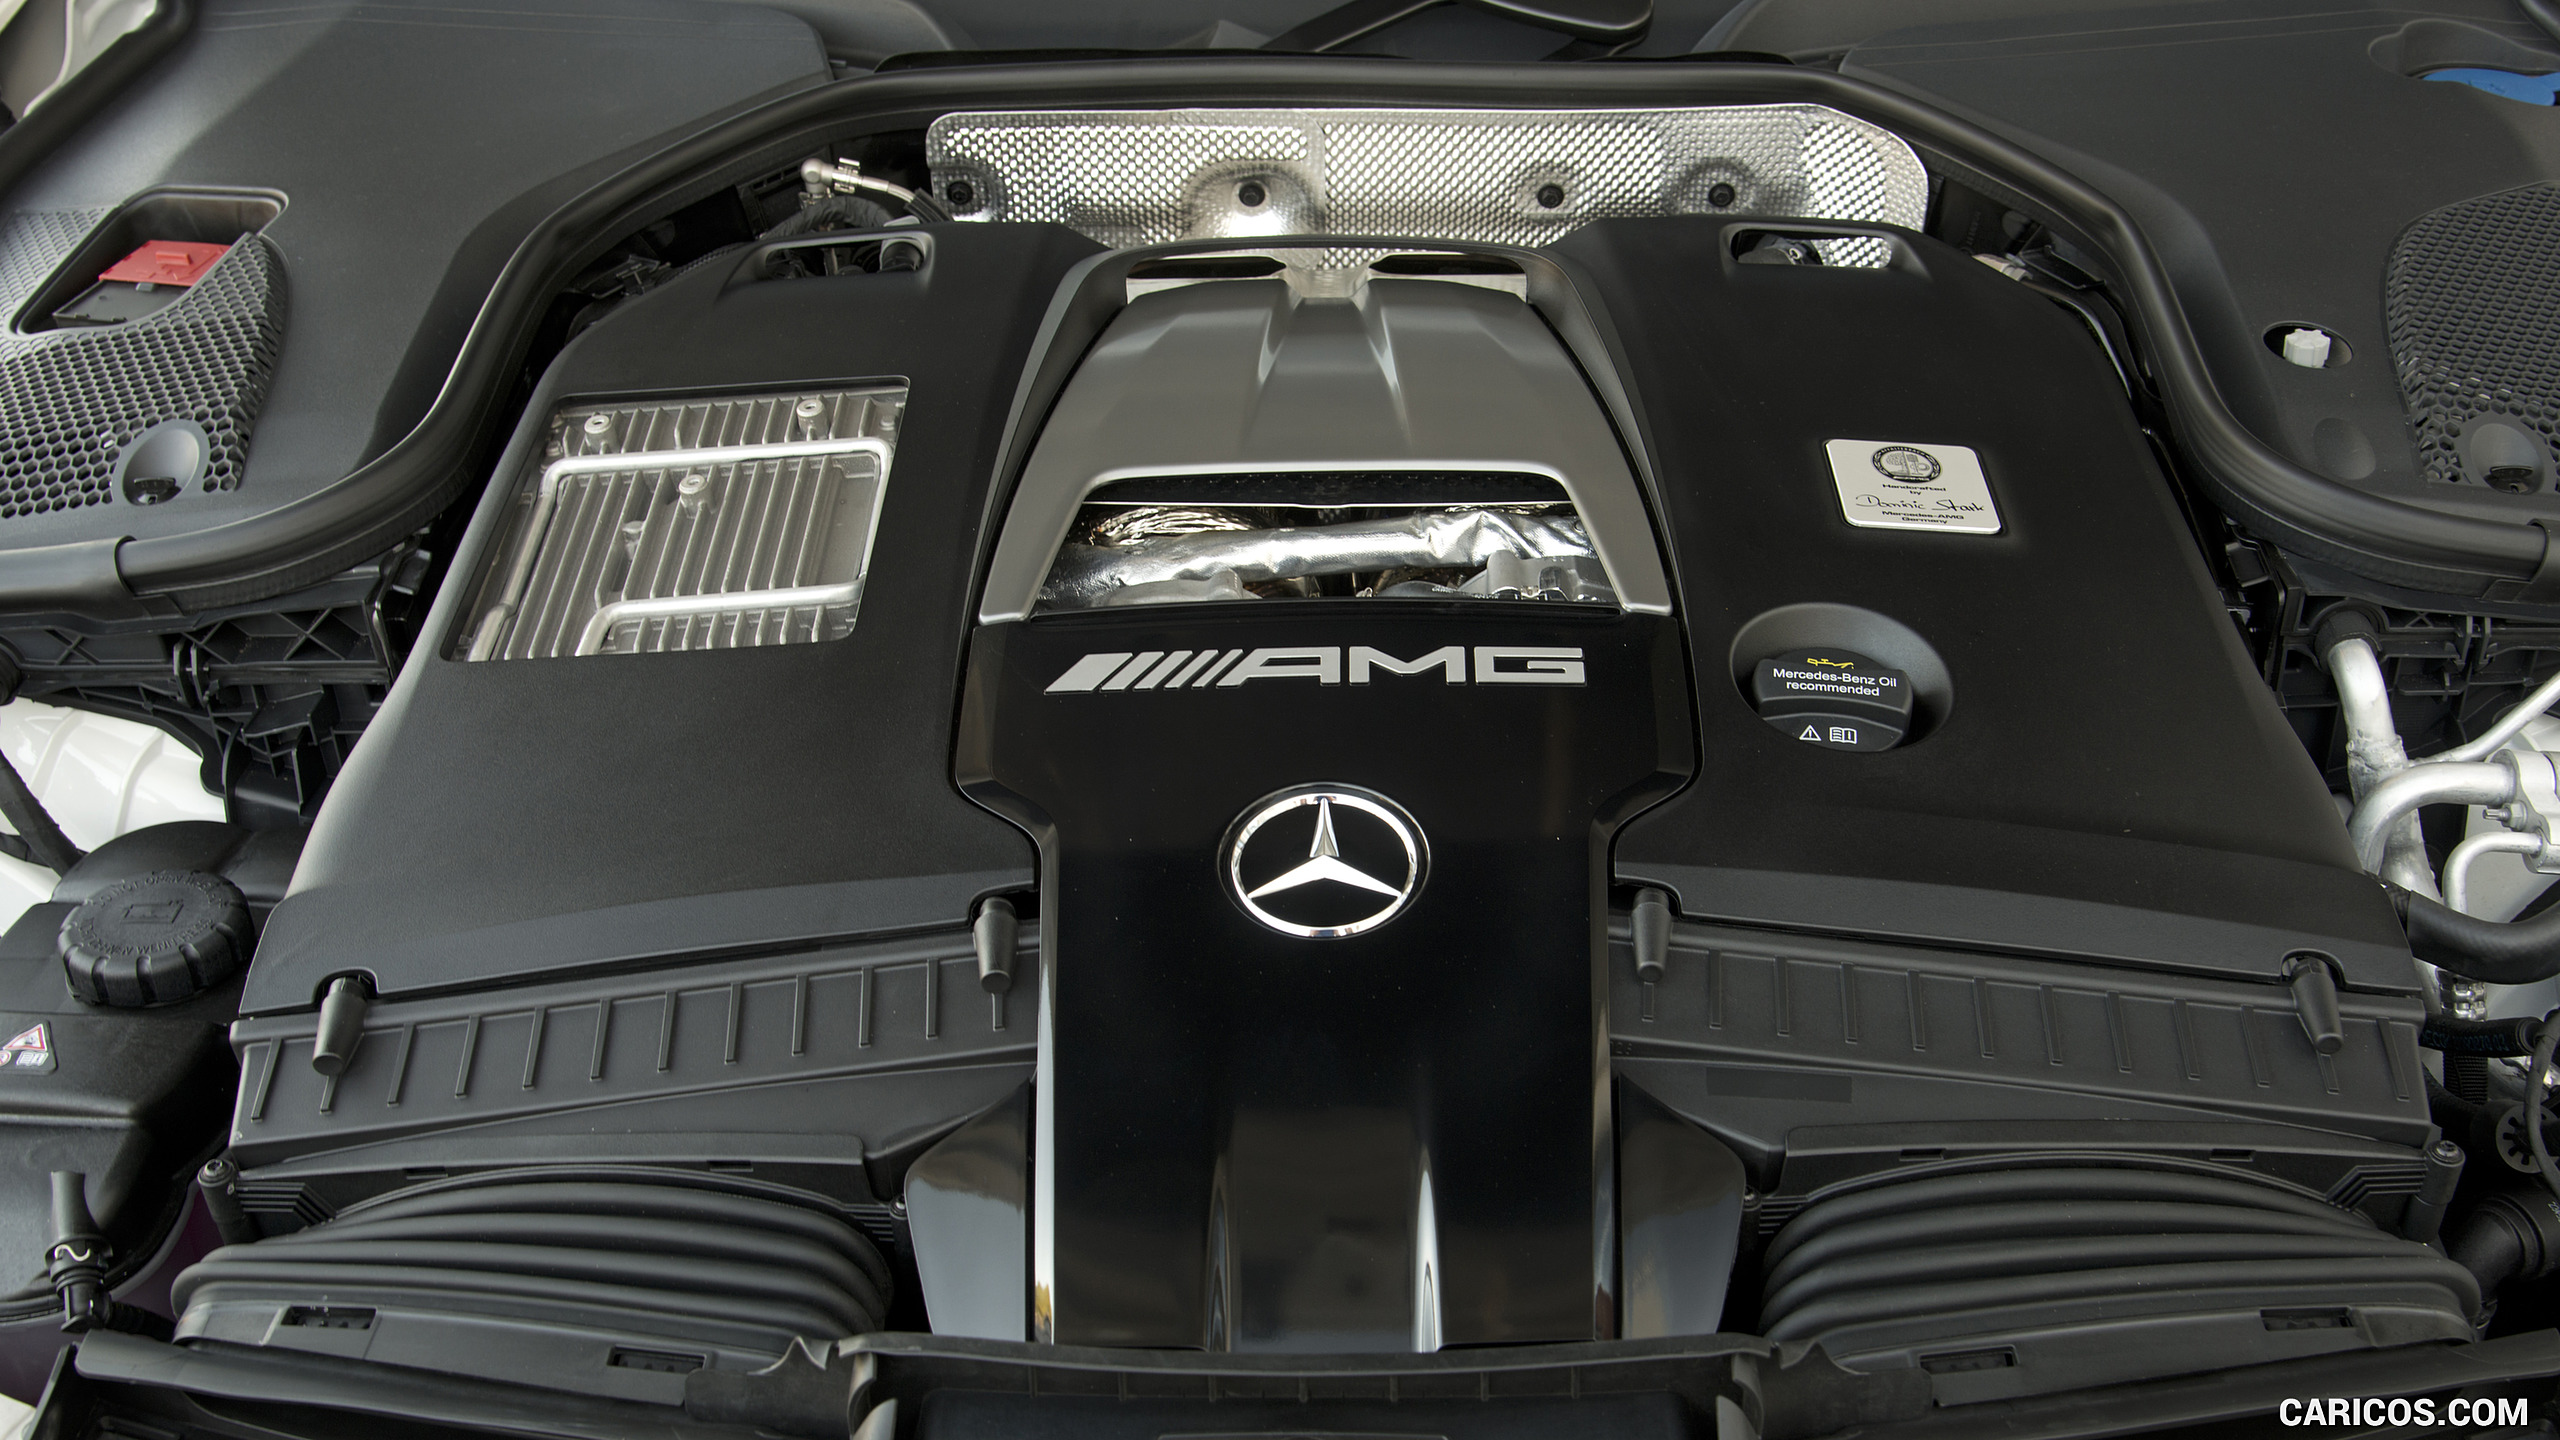 2018 Mercedes-AMG E63 S 4MATIC+ - Engine, #318 of 323